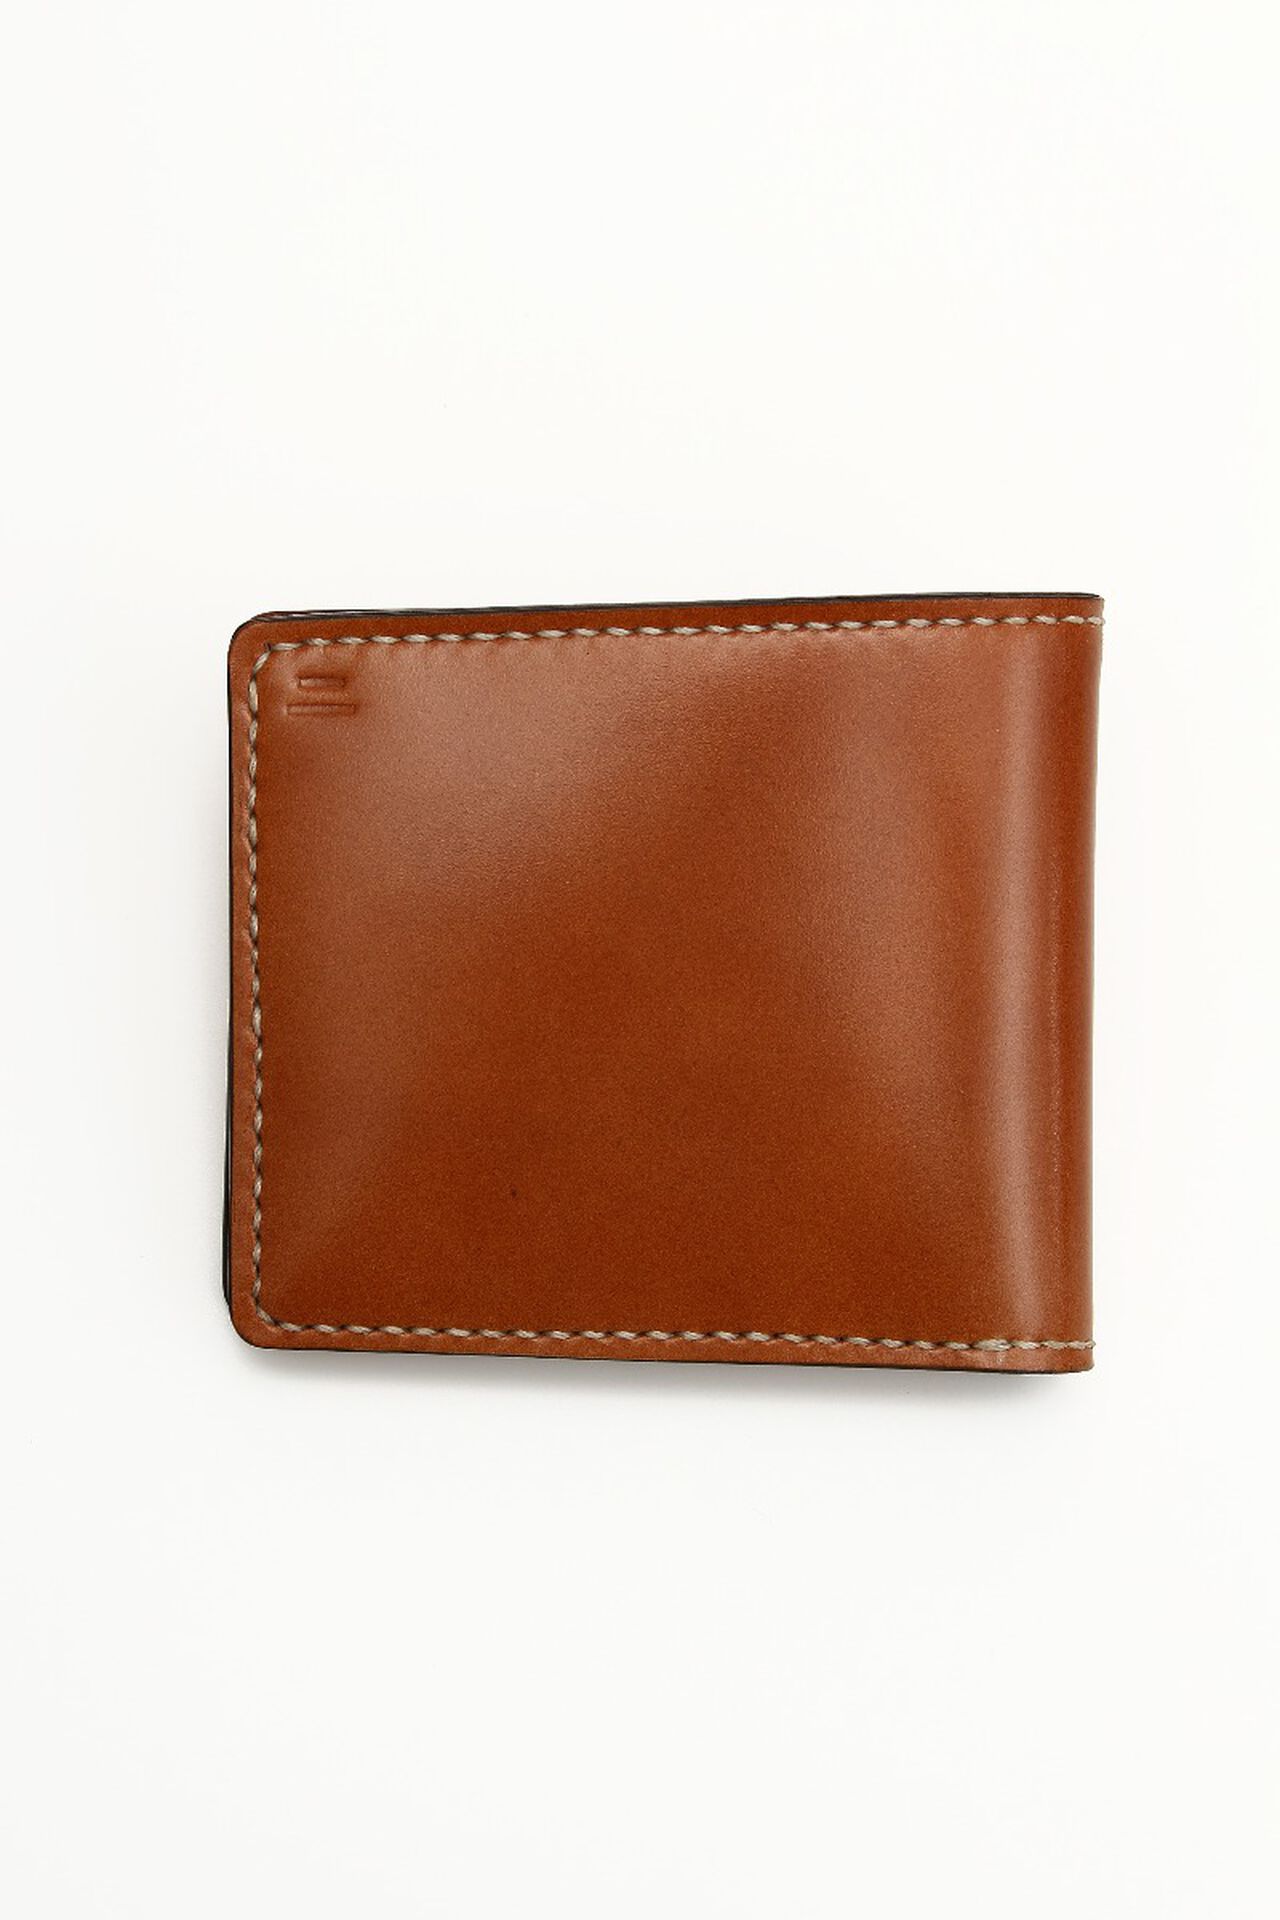 Short Wallet with Coin Pocket (Cordovan) (BROWN),, large image number 0